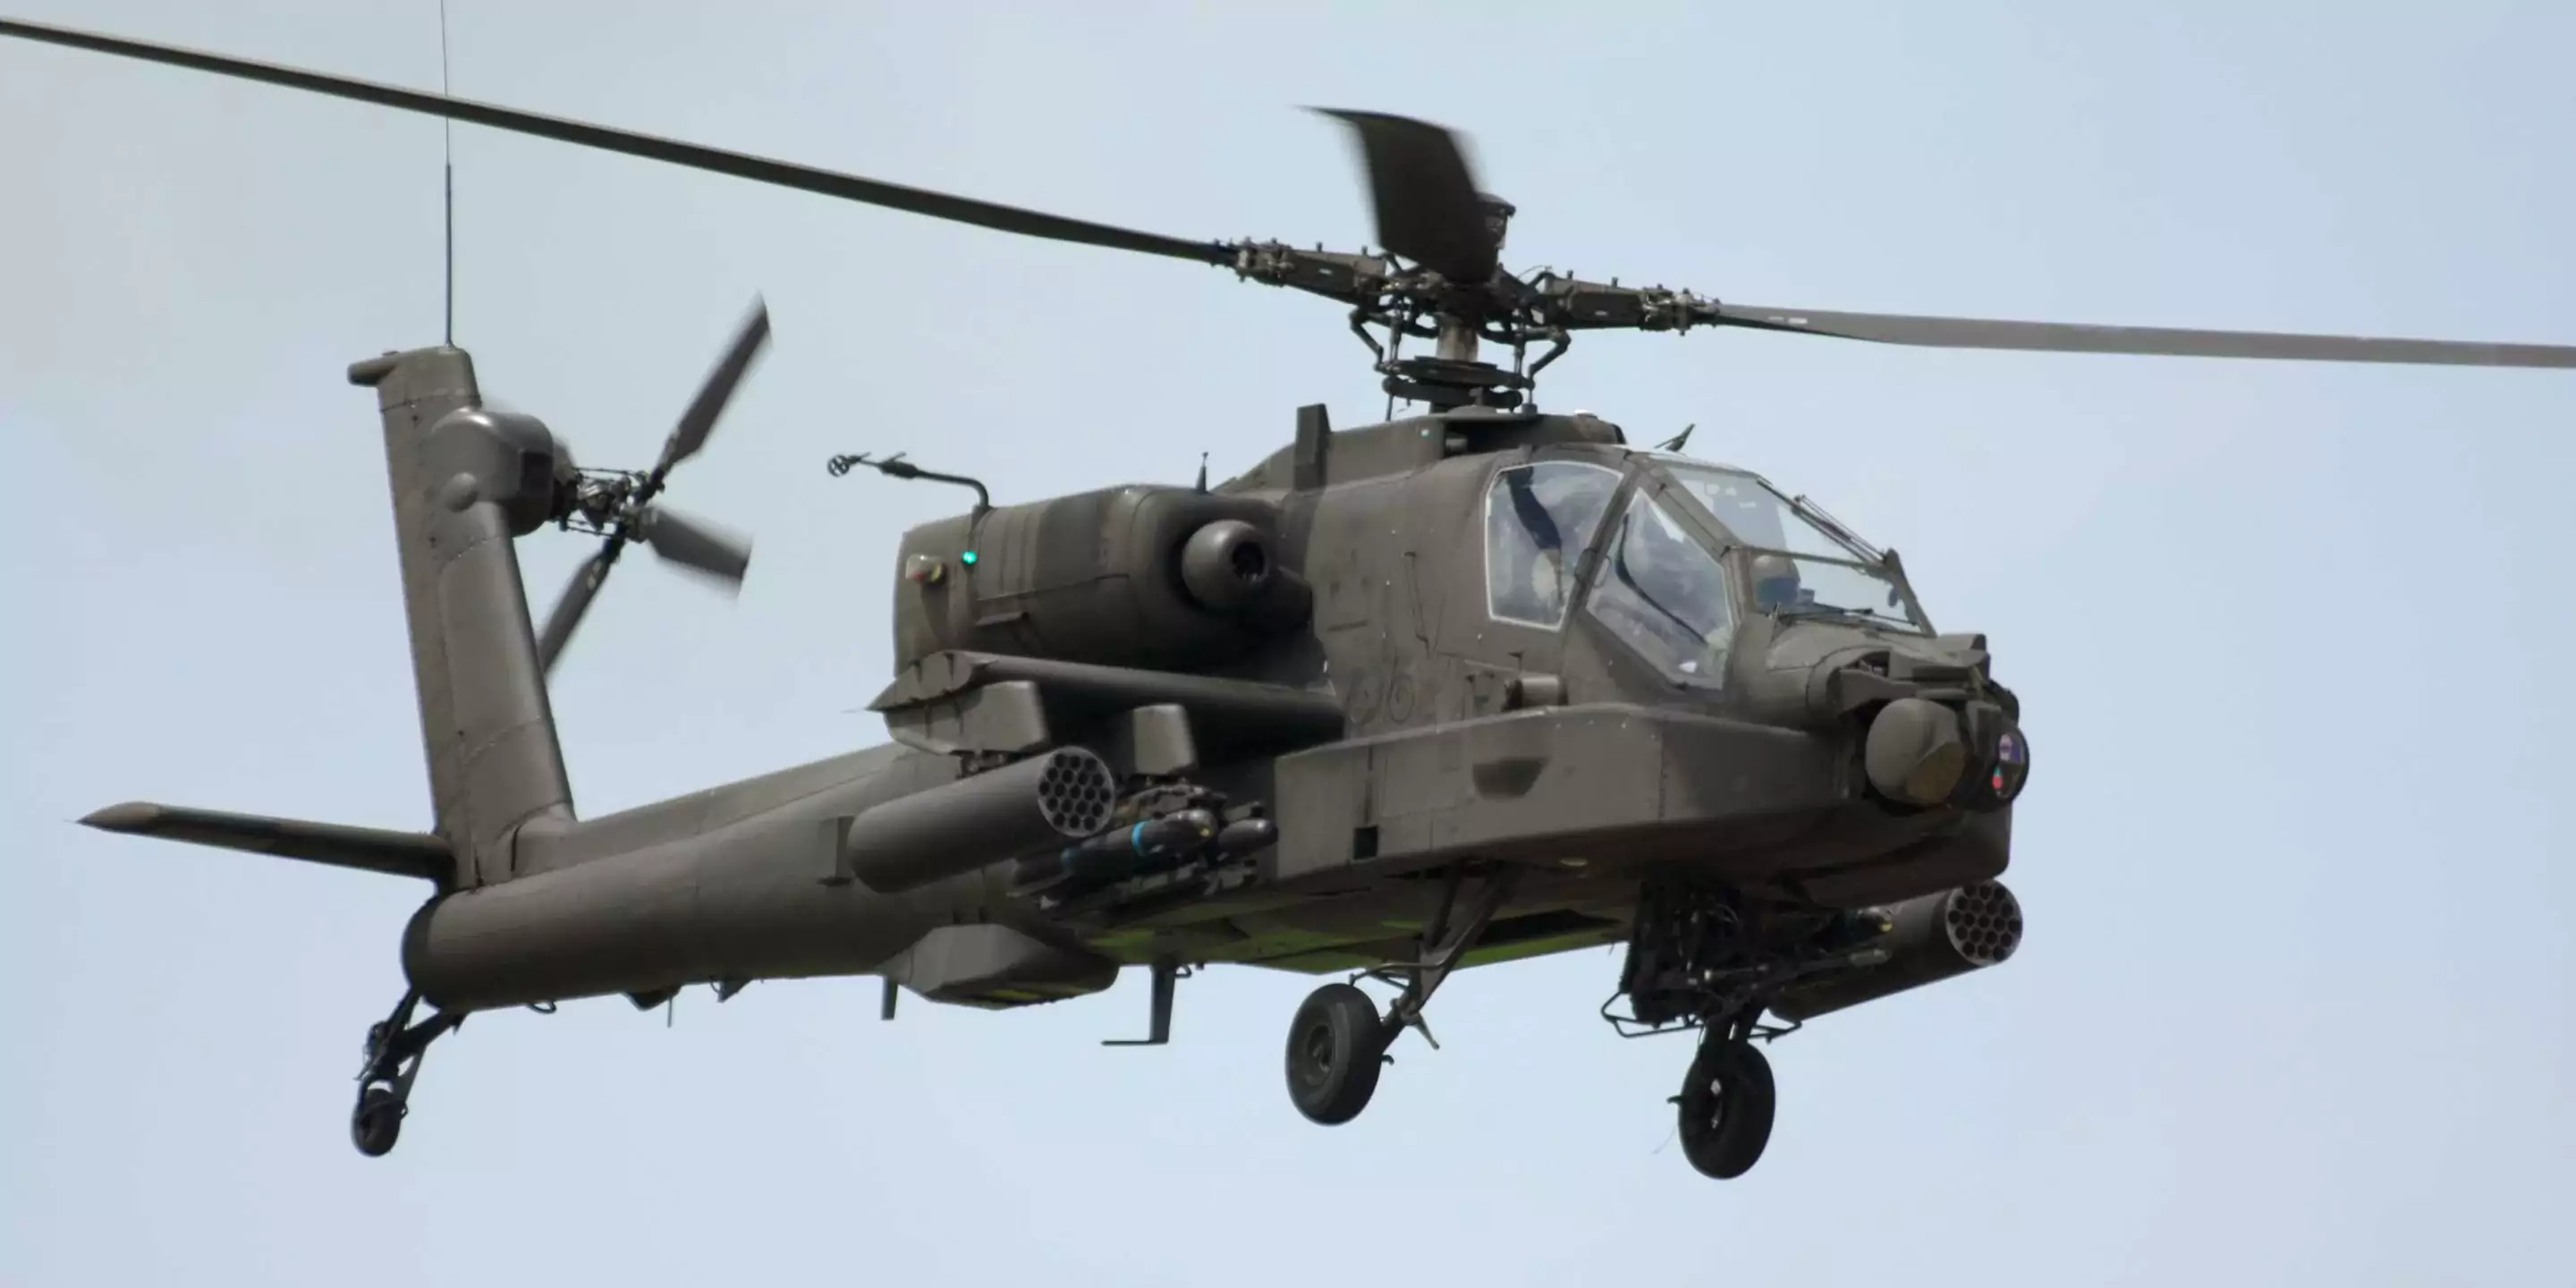 The Commonwealth of Australia’s has decided to proceed with the acquisition of 29 AH-64E Apache attack helicopters